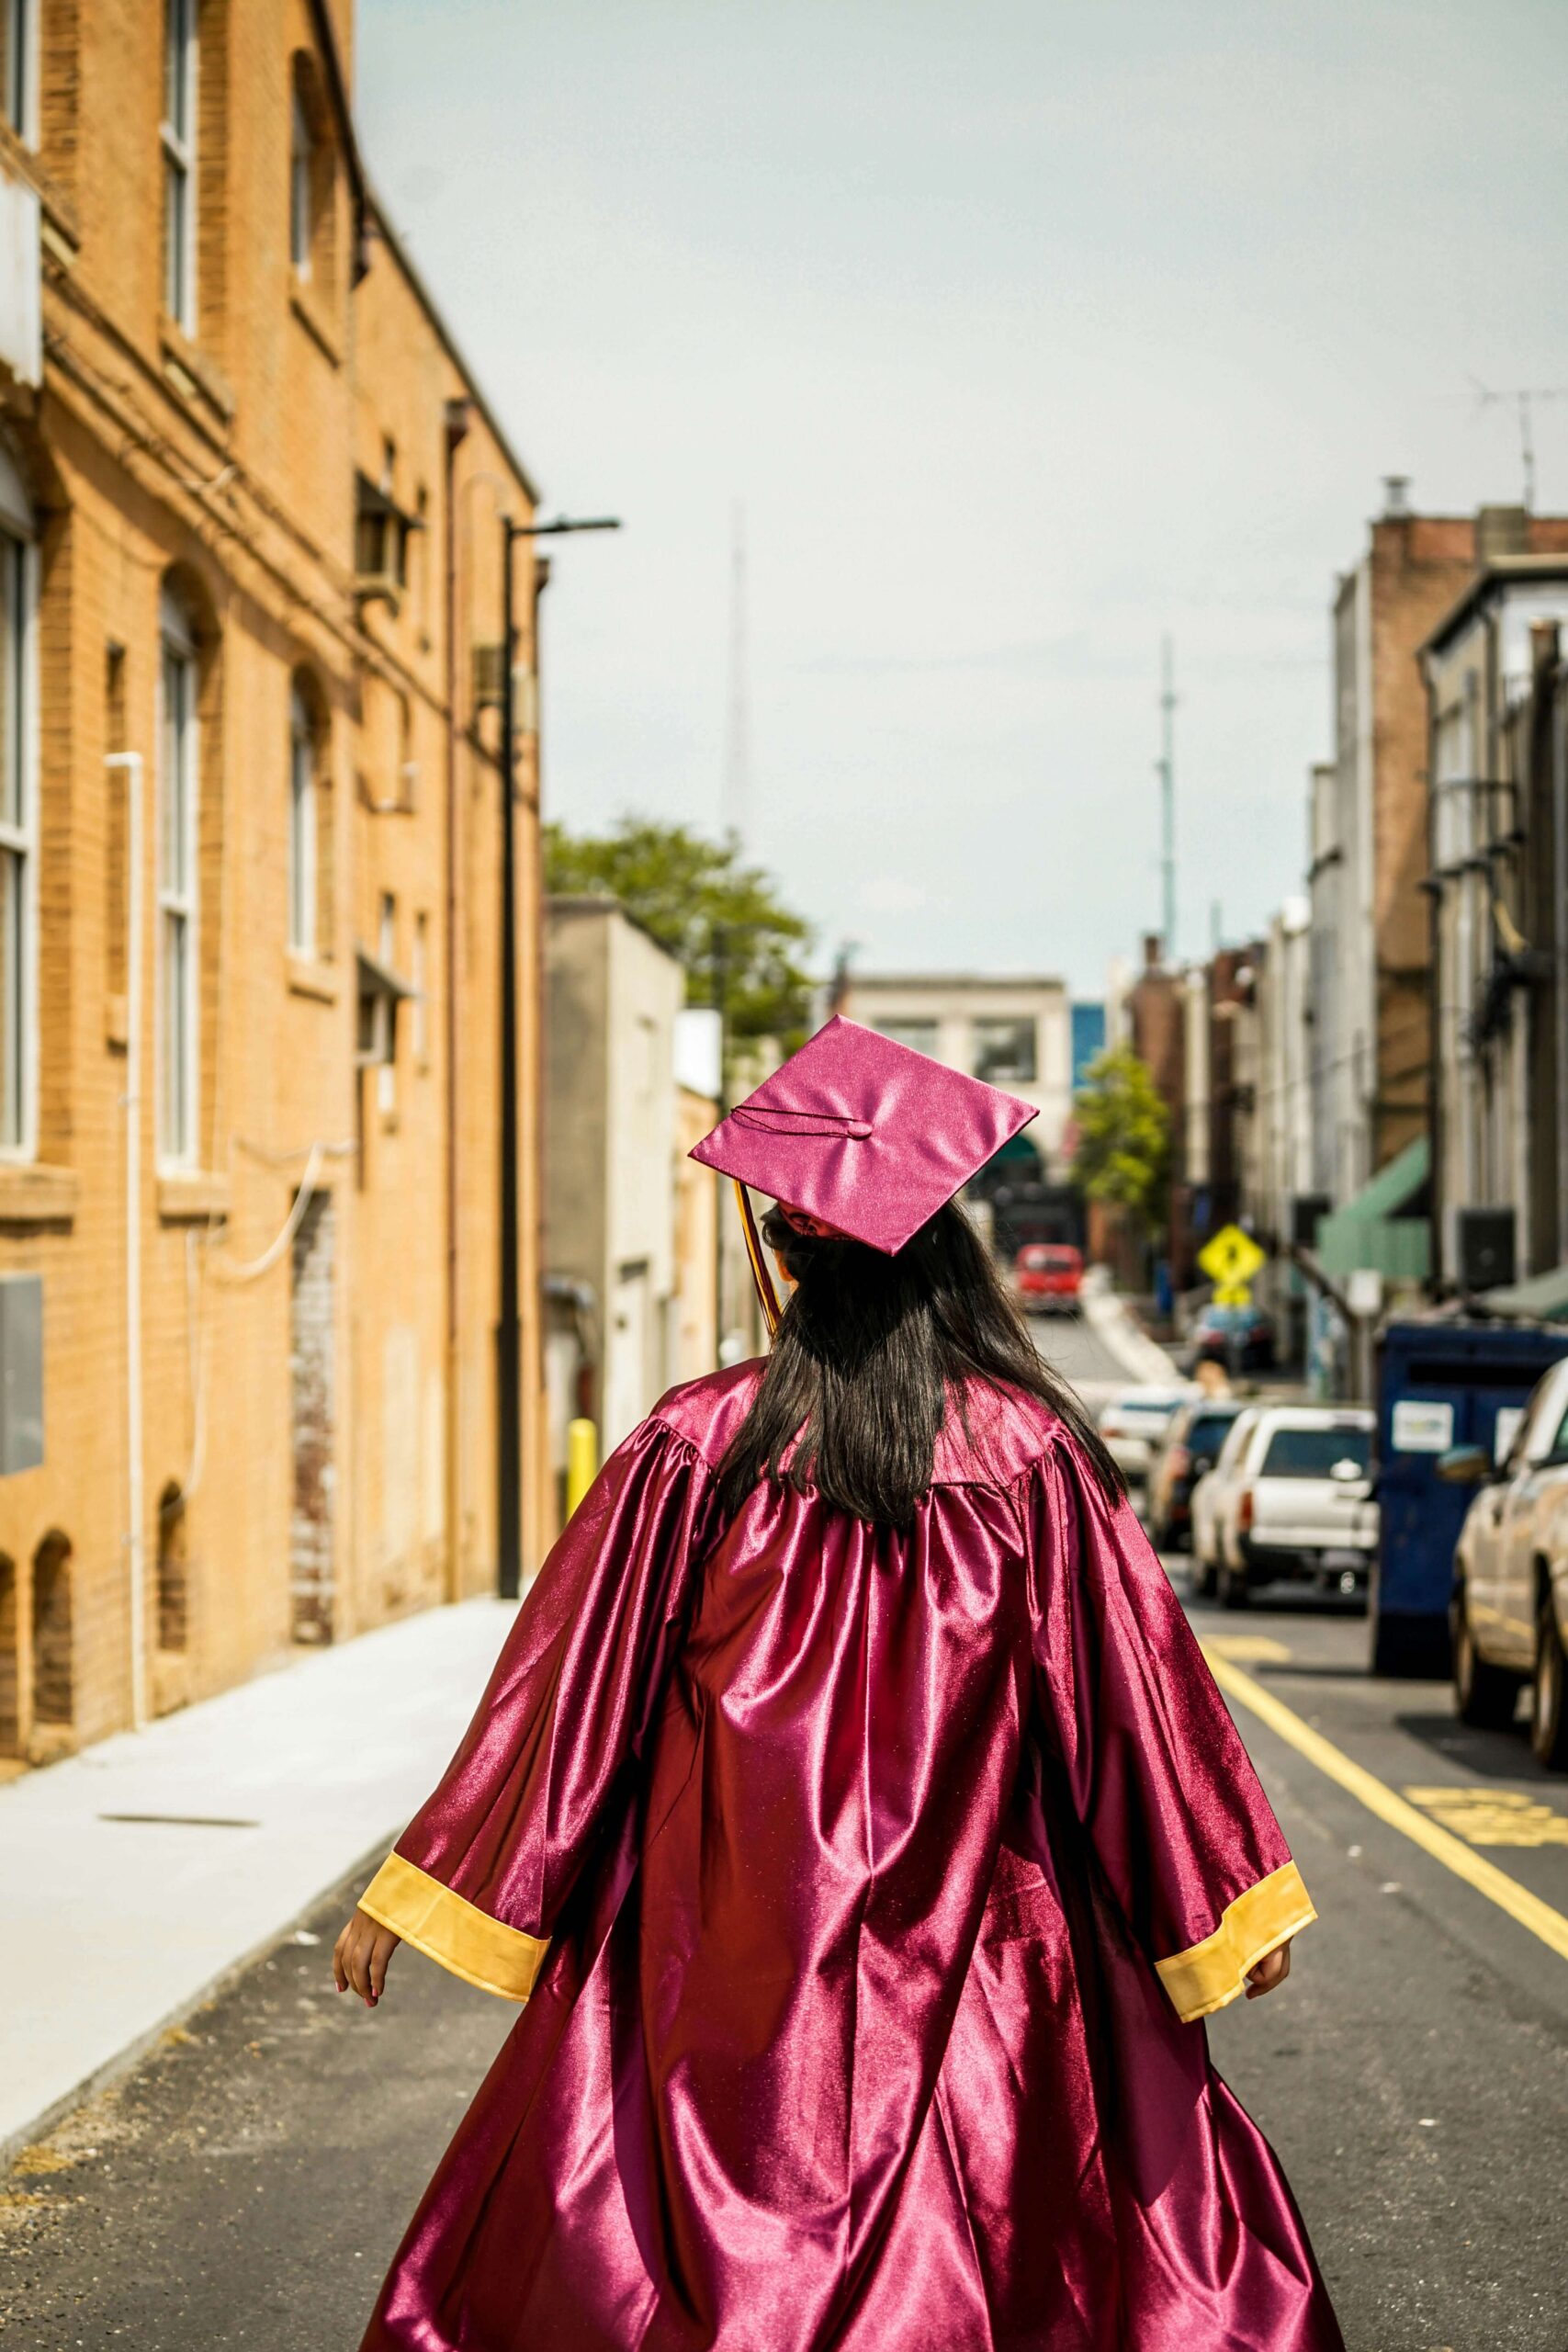 An individual with long brown hair wearing a graduation cap & gown. Representing how the college to career transition may seem daunting. Develop coping skills for anxious moments in NYC anxiety counseling.